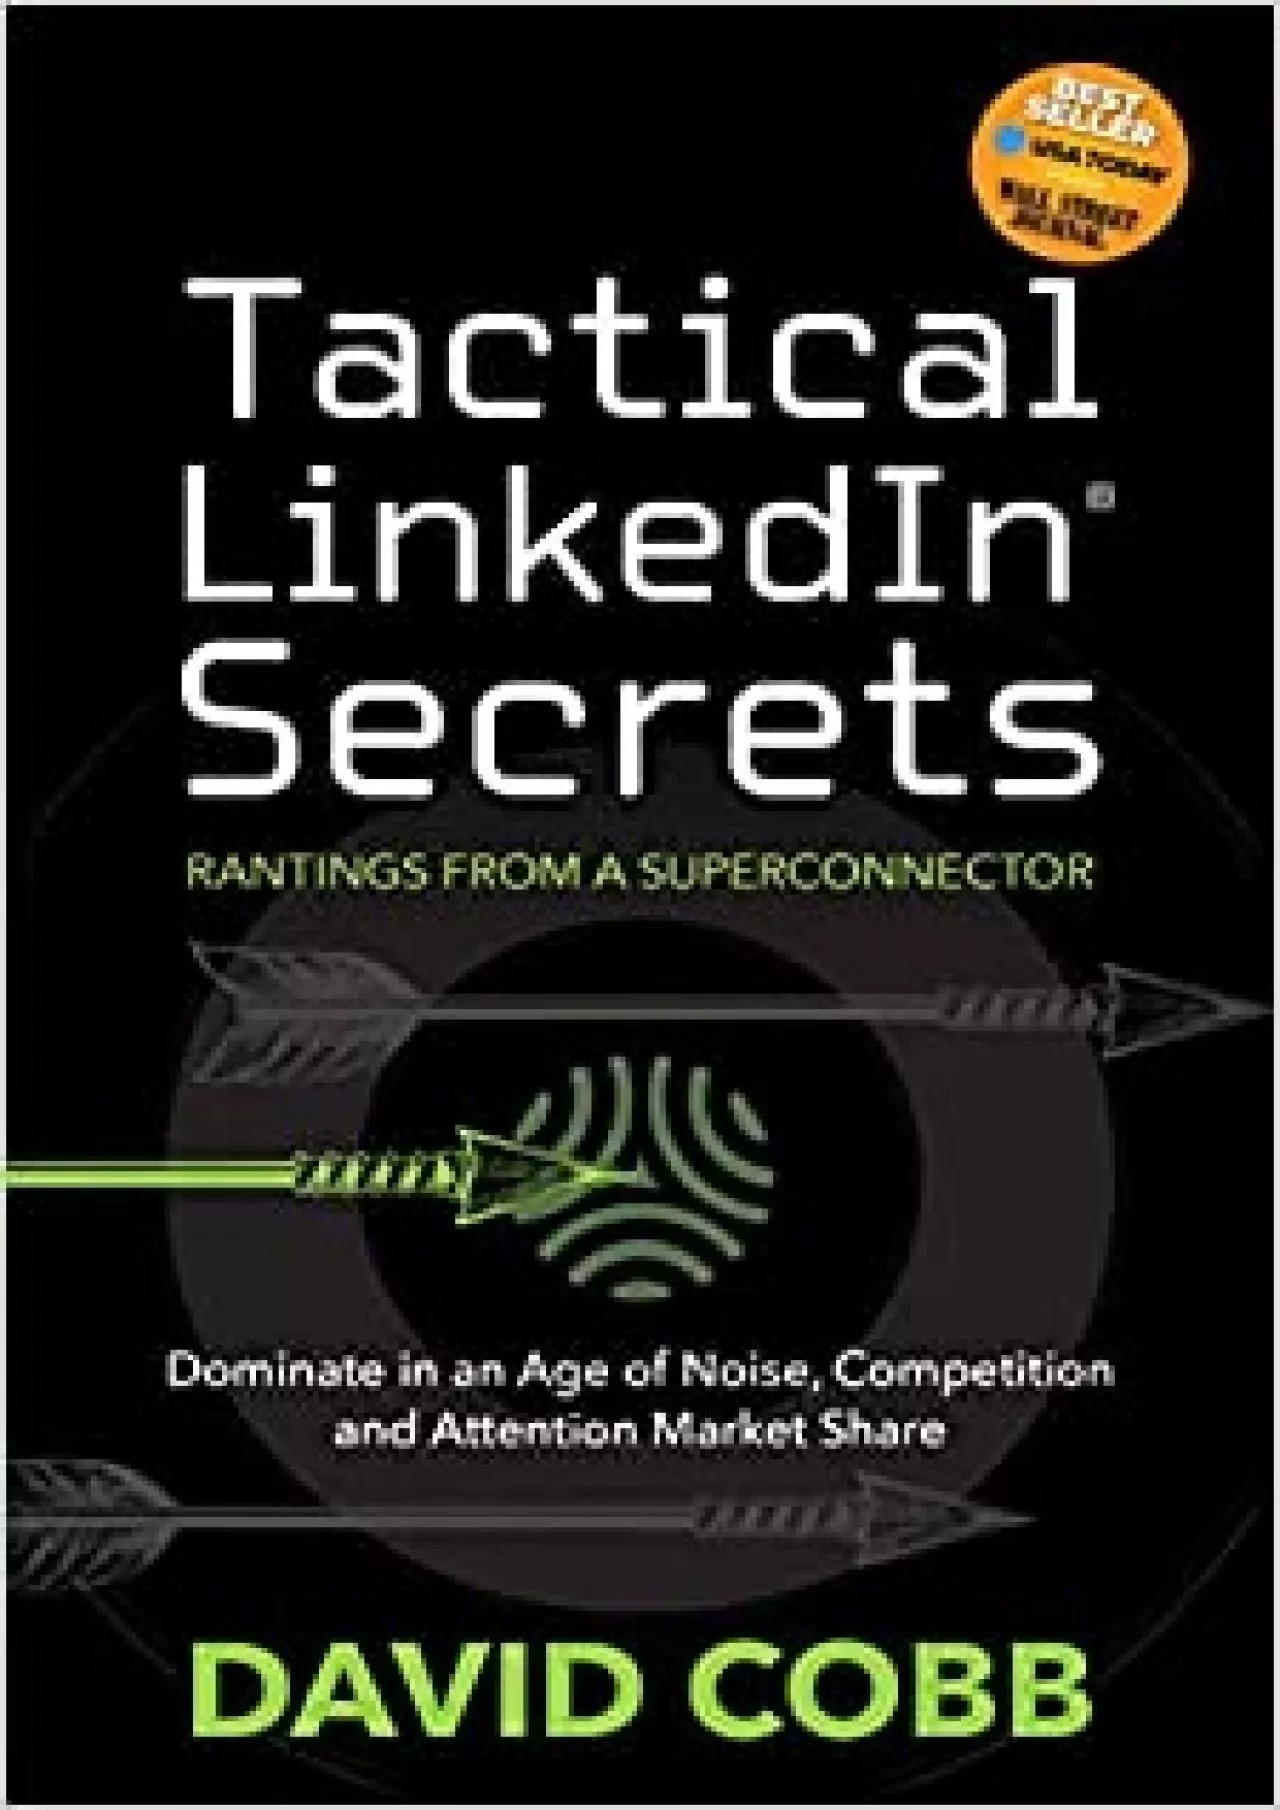 Tactical LinkedIn® Secrets Dominate in an Age of Noise, Competition and Attention Market